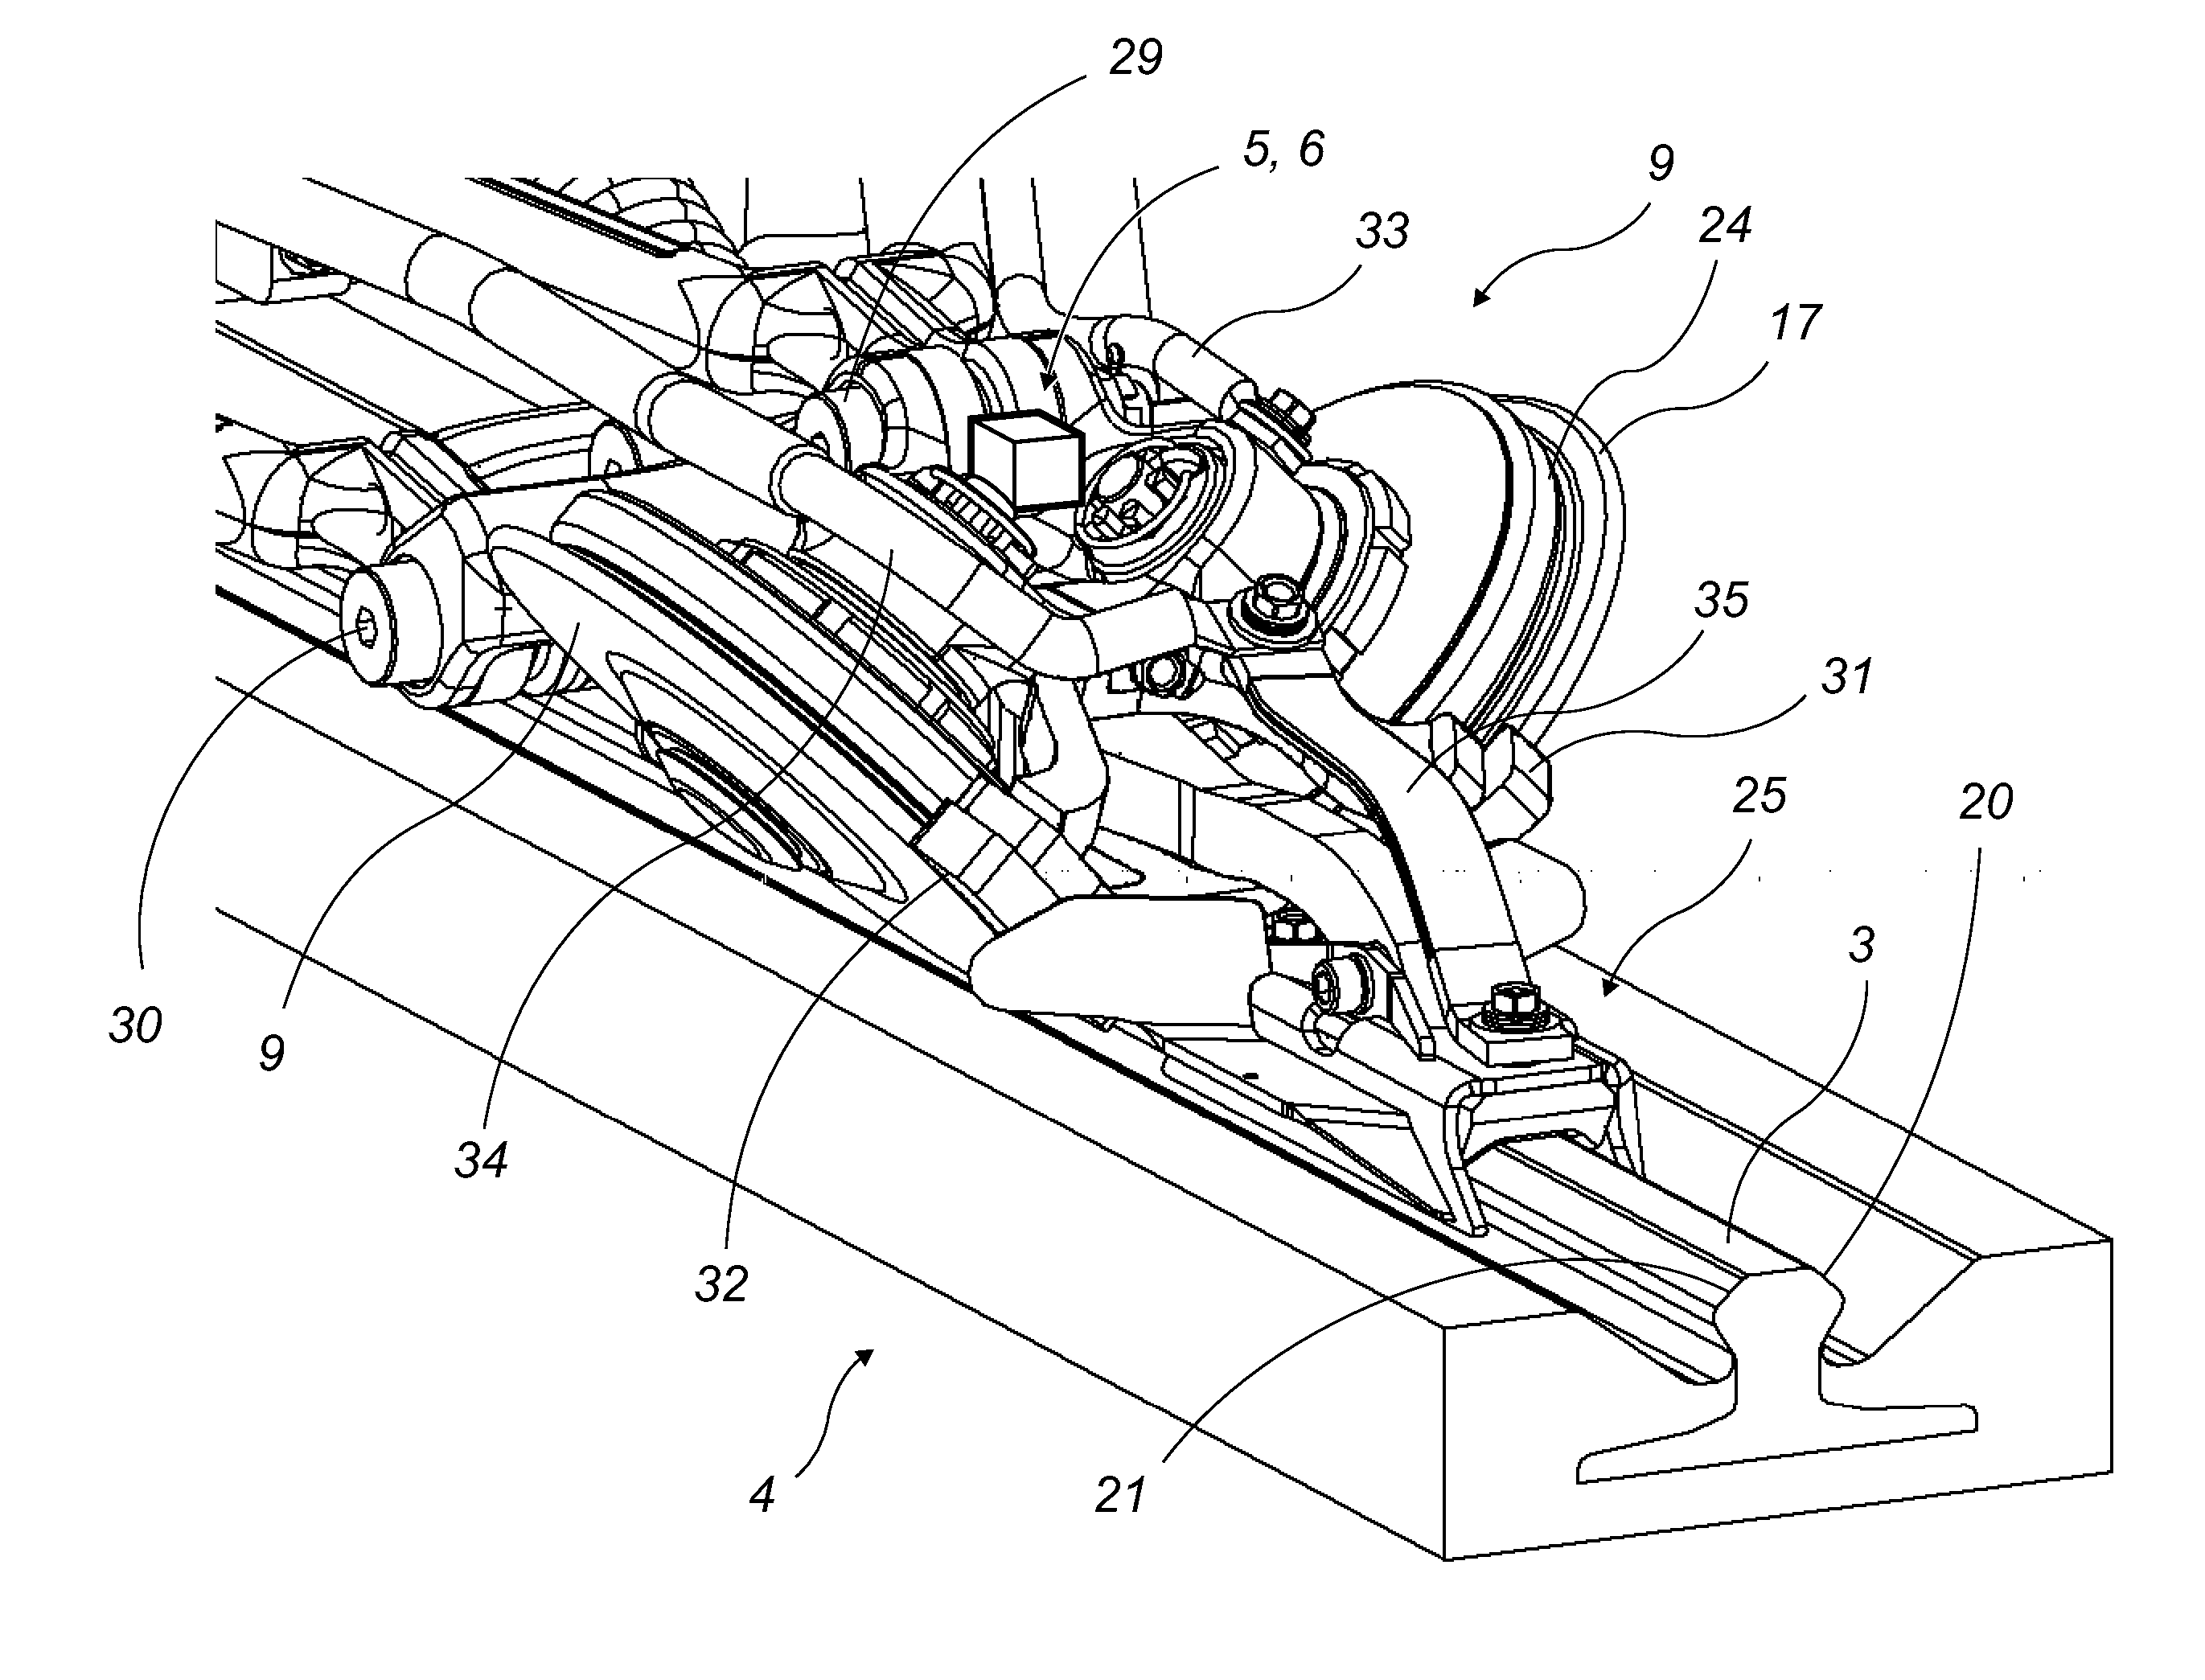 System For Dynamic Control Of The Rolling Of The Guide Roller(s) For An Assembly For Guiding A Vehicle Along At Least One Rail